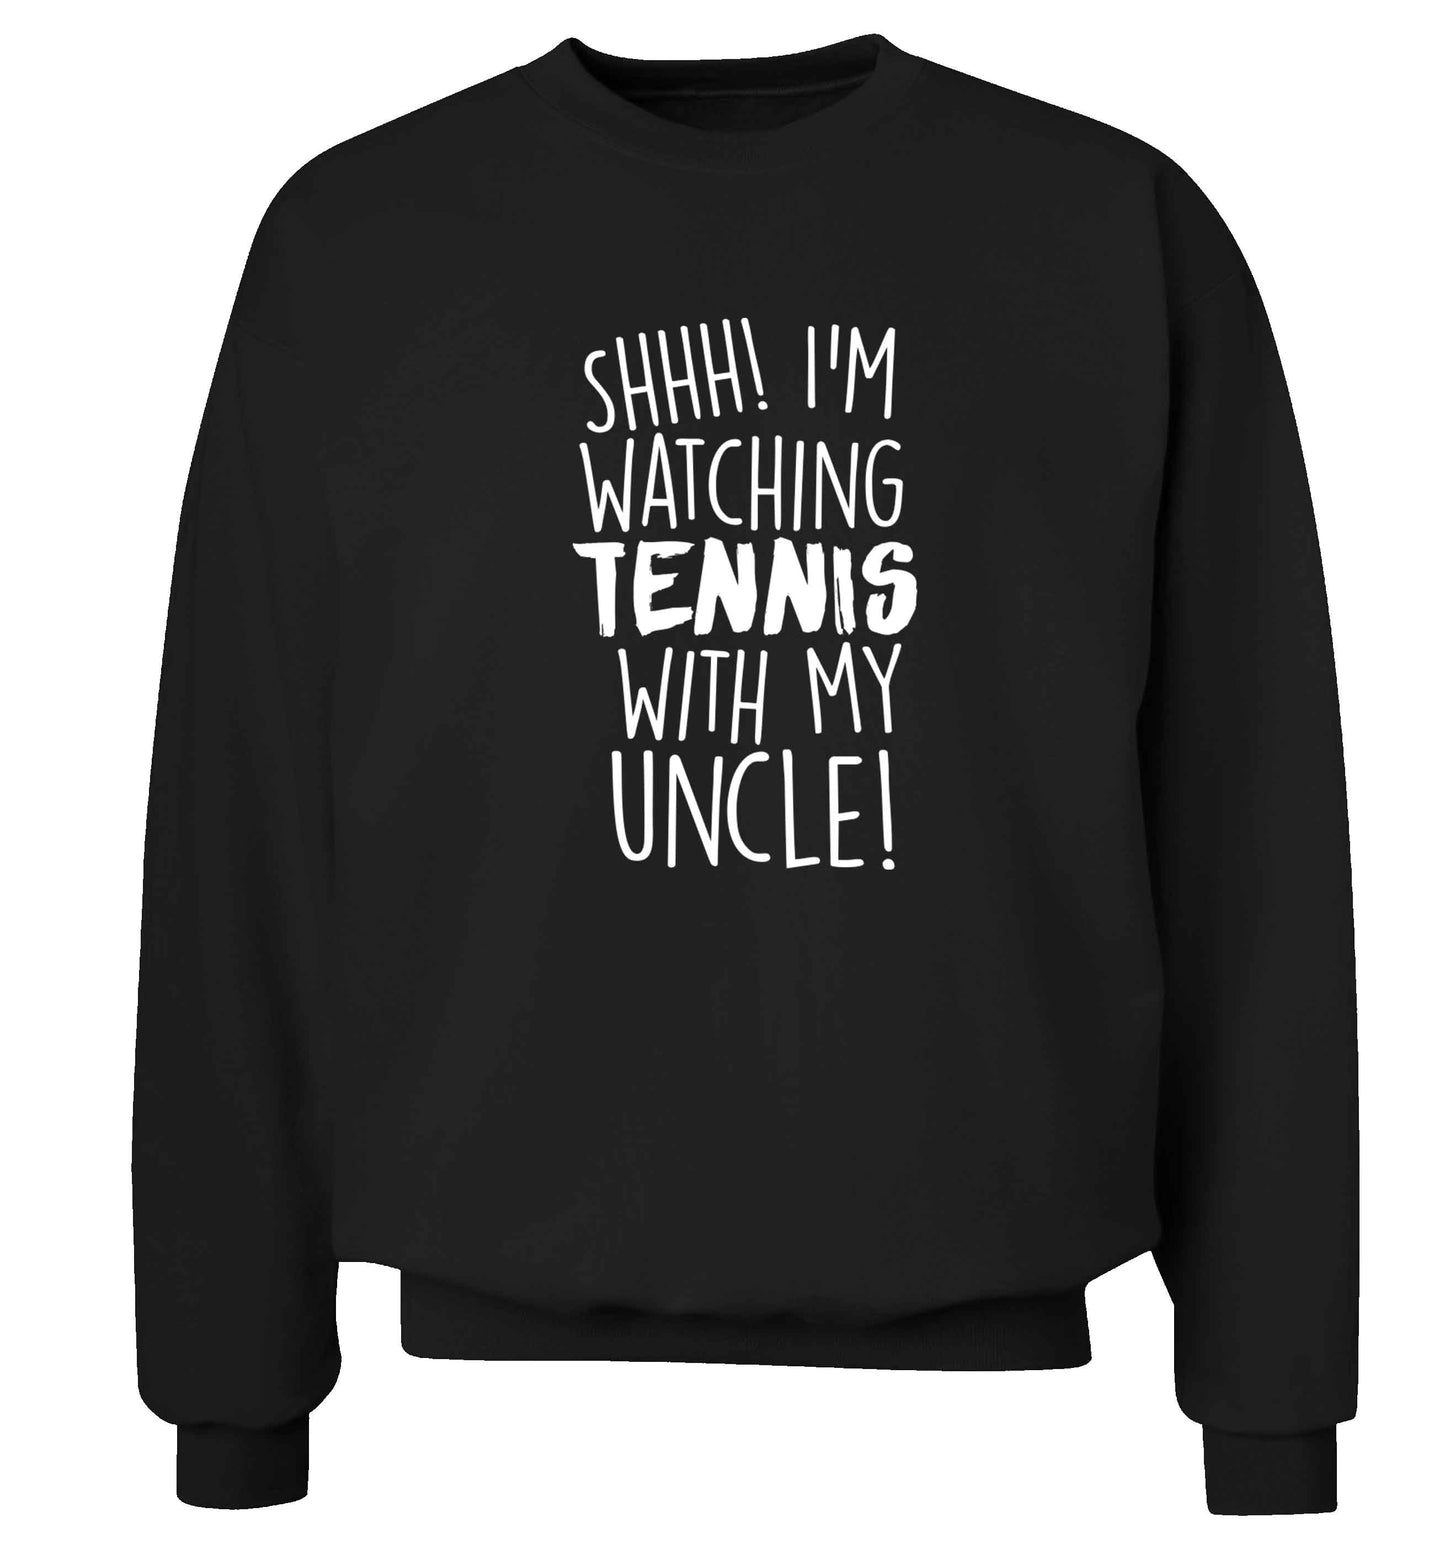 Shh! I'm watching tennis with my uncle! Adult's unisex black Sweater 2XL